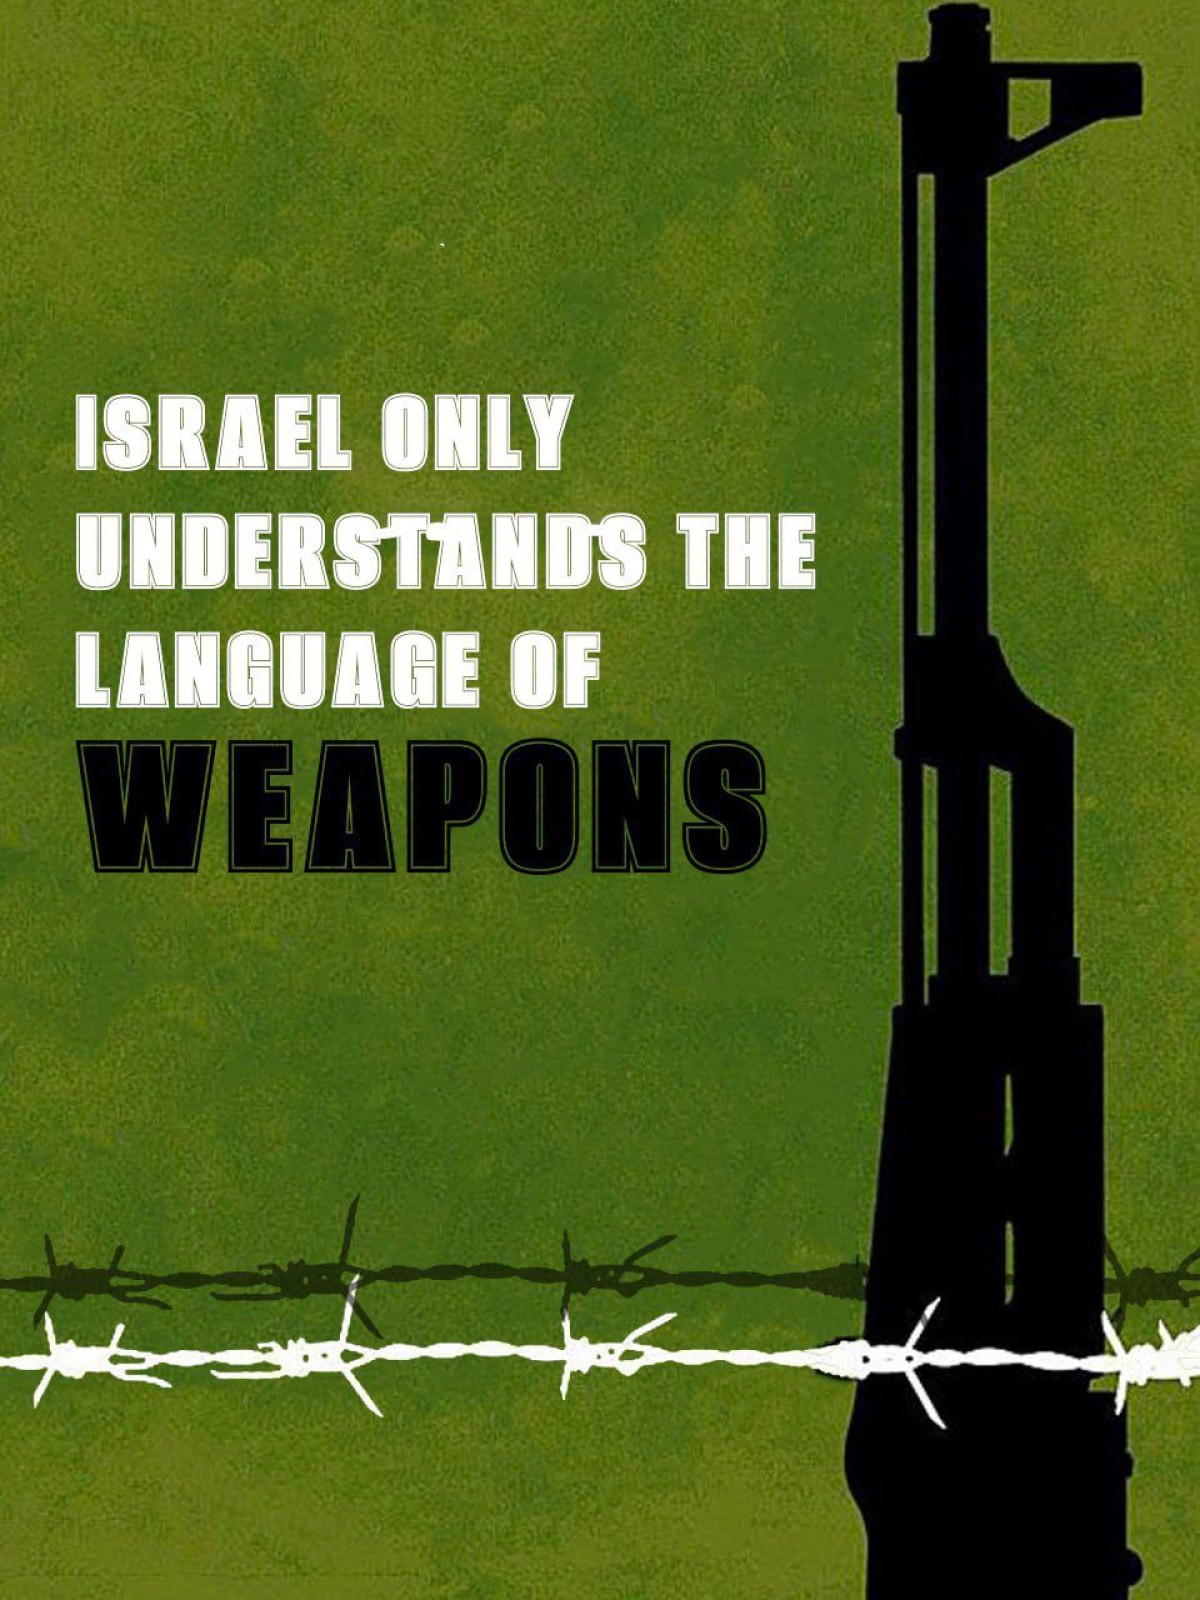 ISRAEL ONLY UNDERSTANDS THE LANGUAGE OF WEAPONS